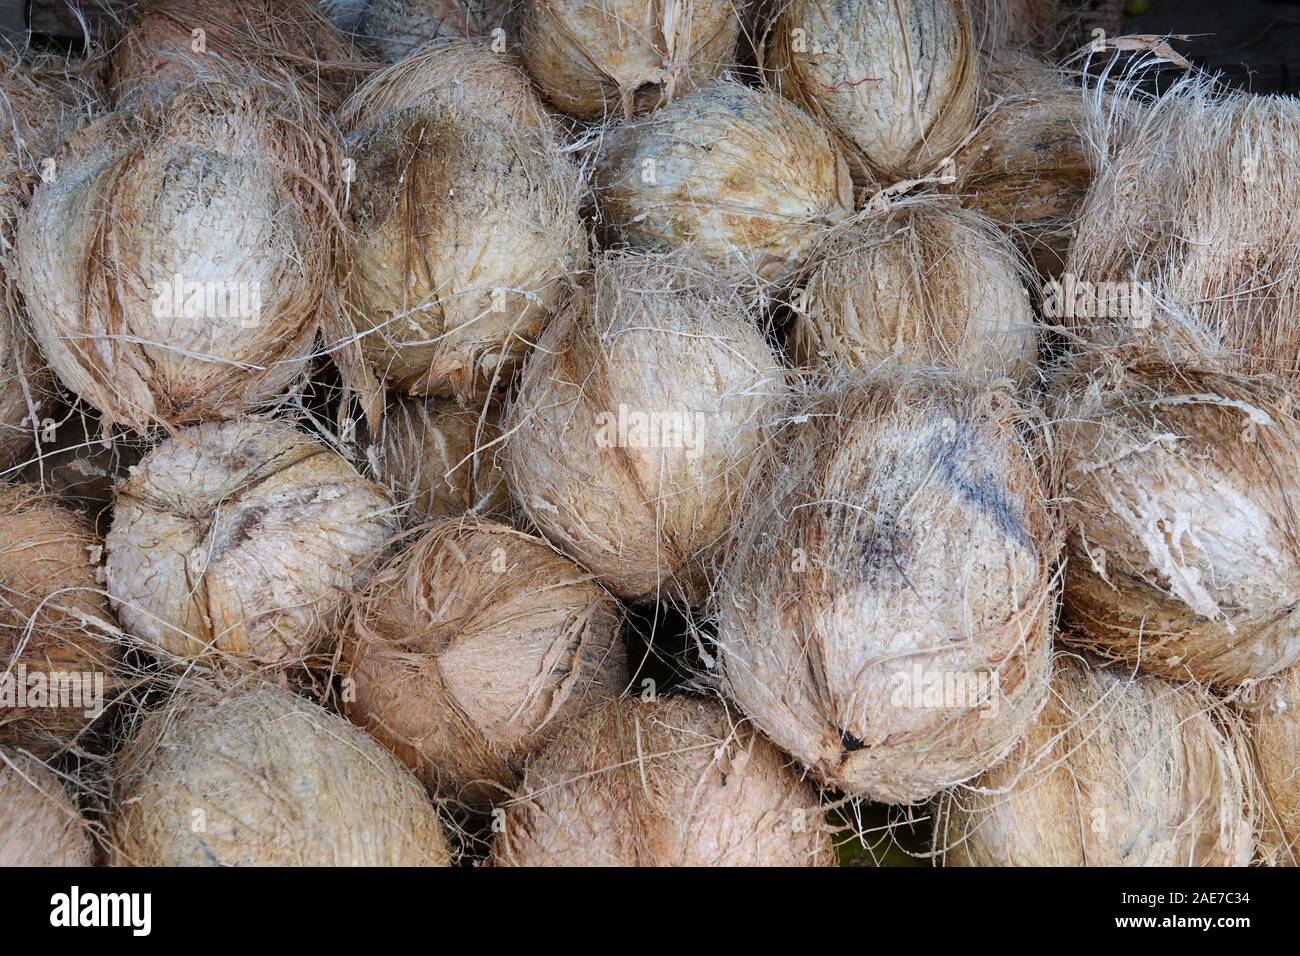 Pile of coconuts close-up. Market of fruit and vegetable in Sri Lanka Stock Photo